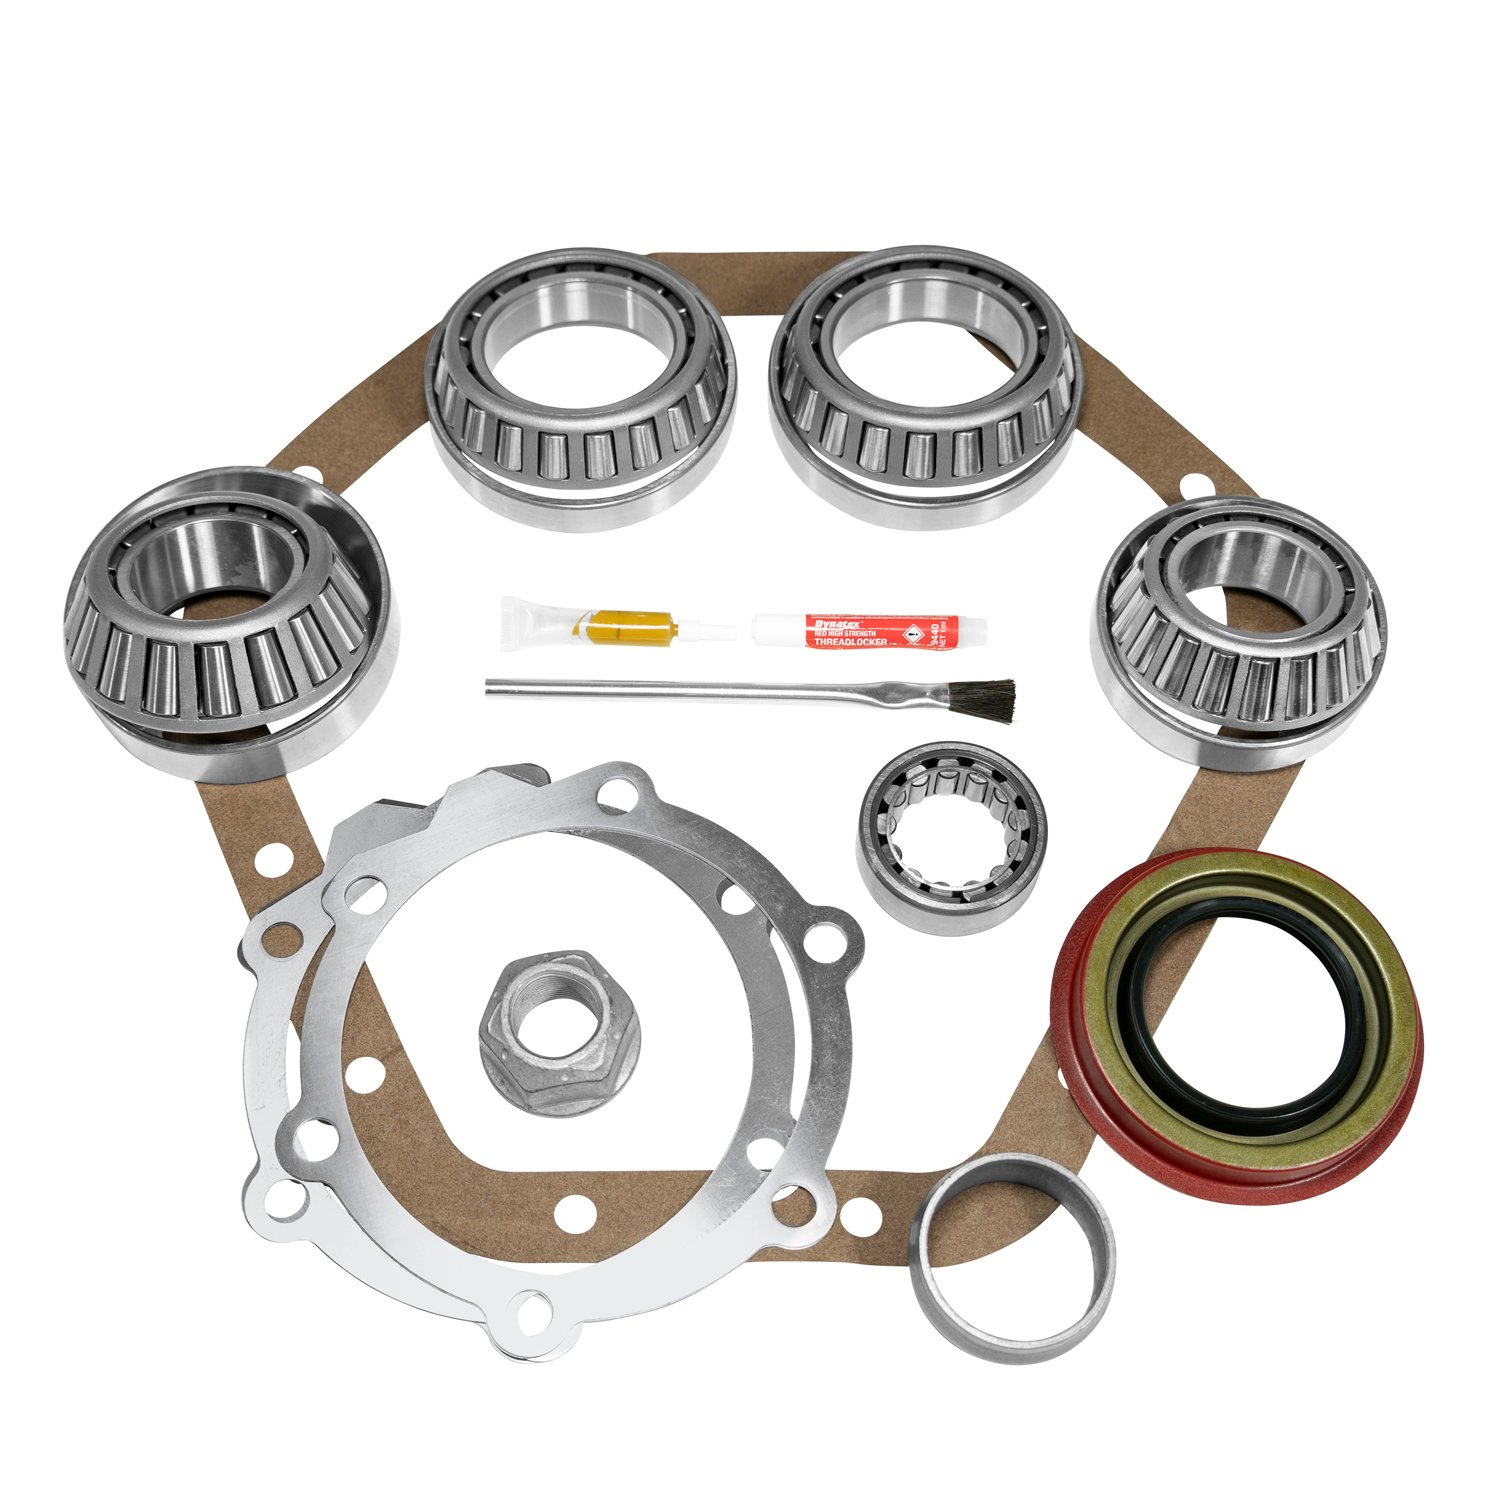 USA Standard ZK GM14T-B Master Overhaul Kit, For The GM 10.5 in. 14T Differential, '89-'98